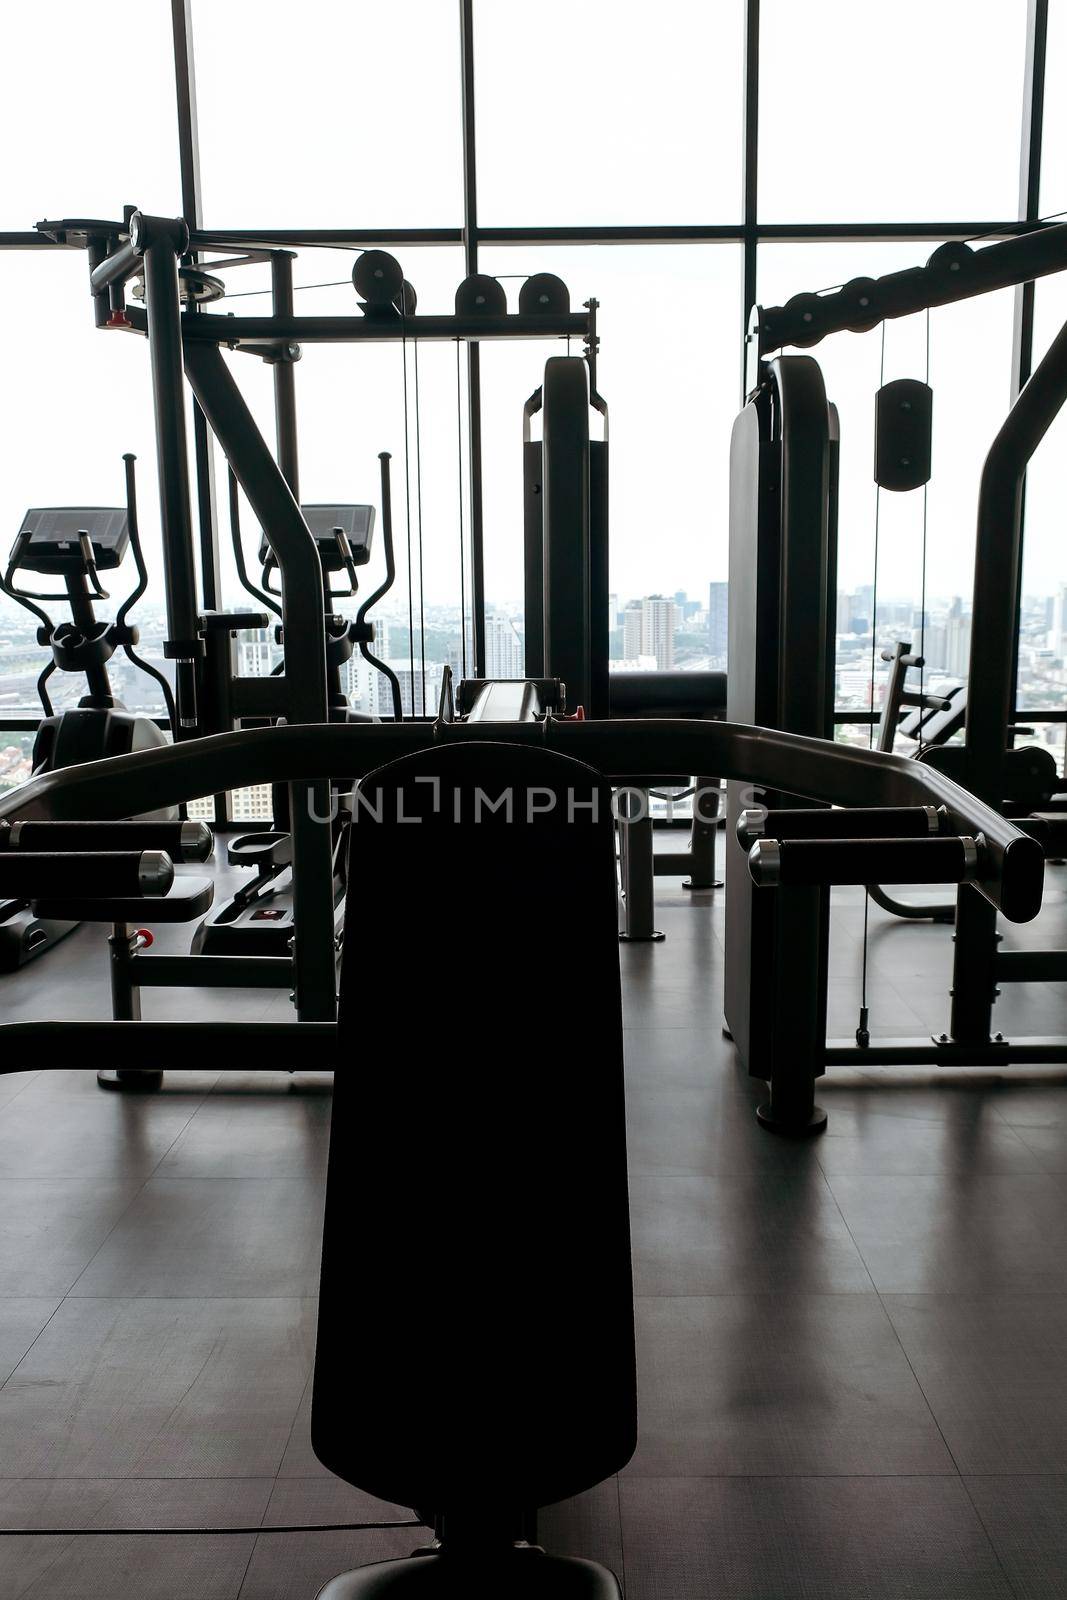 exercise machines in an empty gym